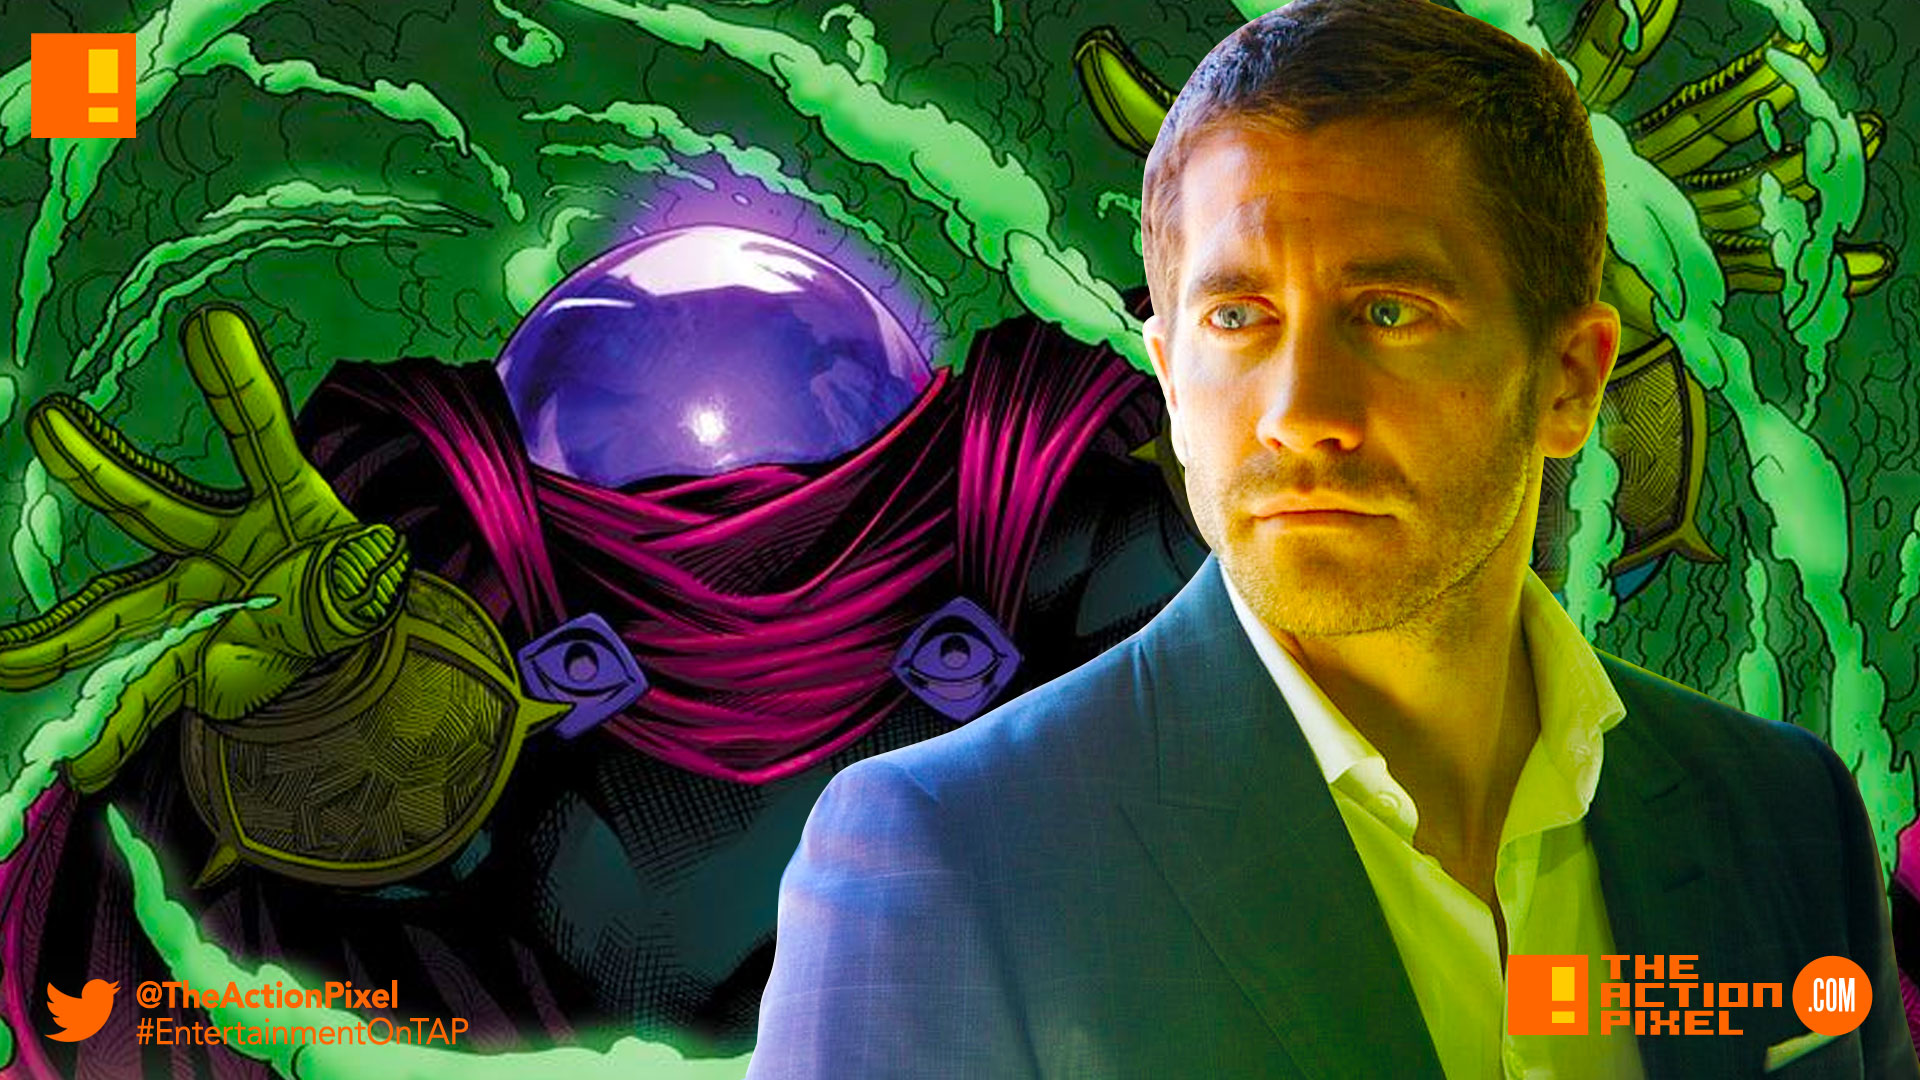 JAKE GYLLENHAAL, MYSTERIO, spider-man: homecoming, the action pixel, entertainment on tap